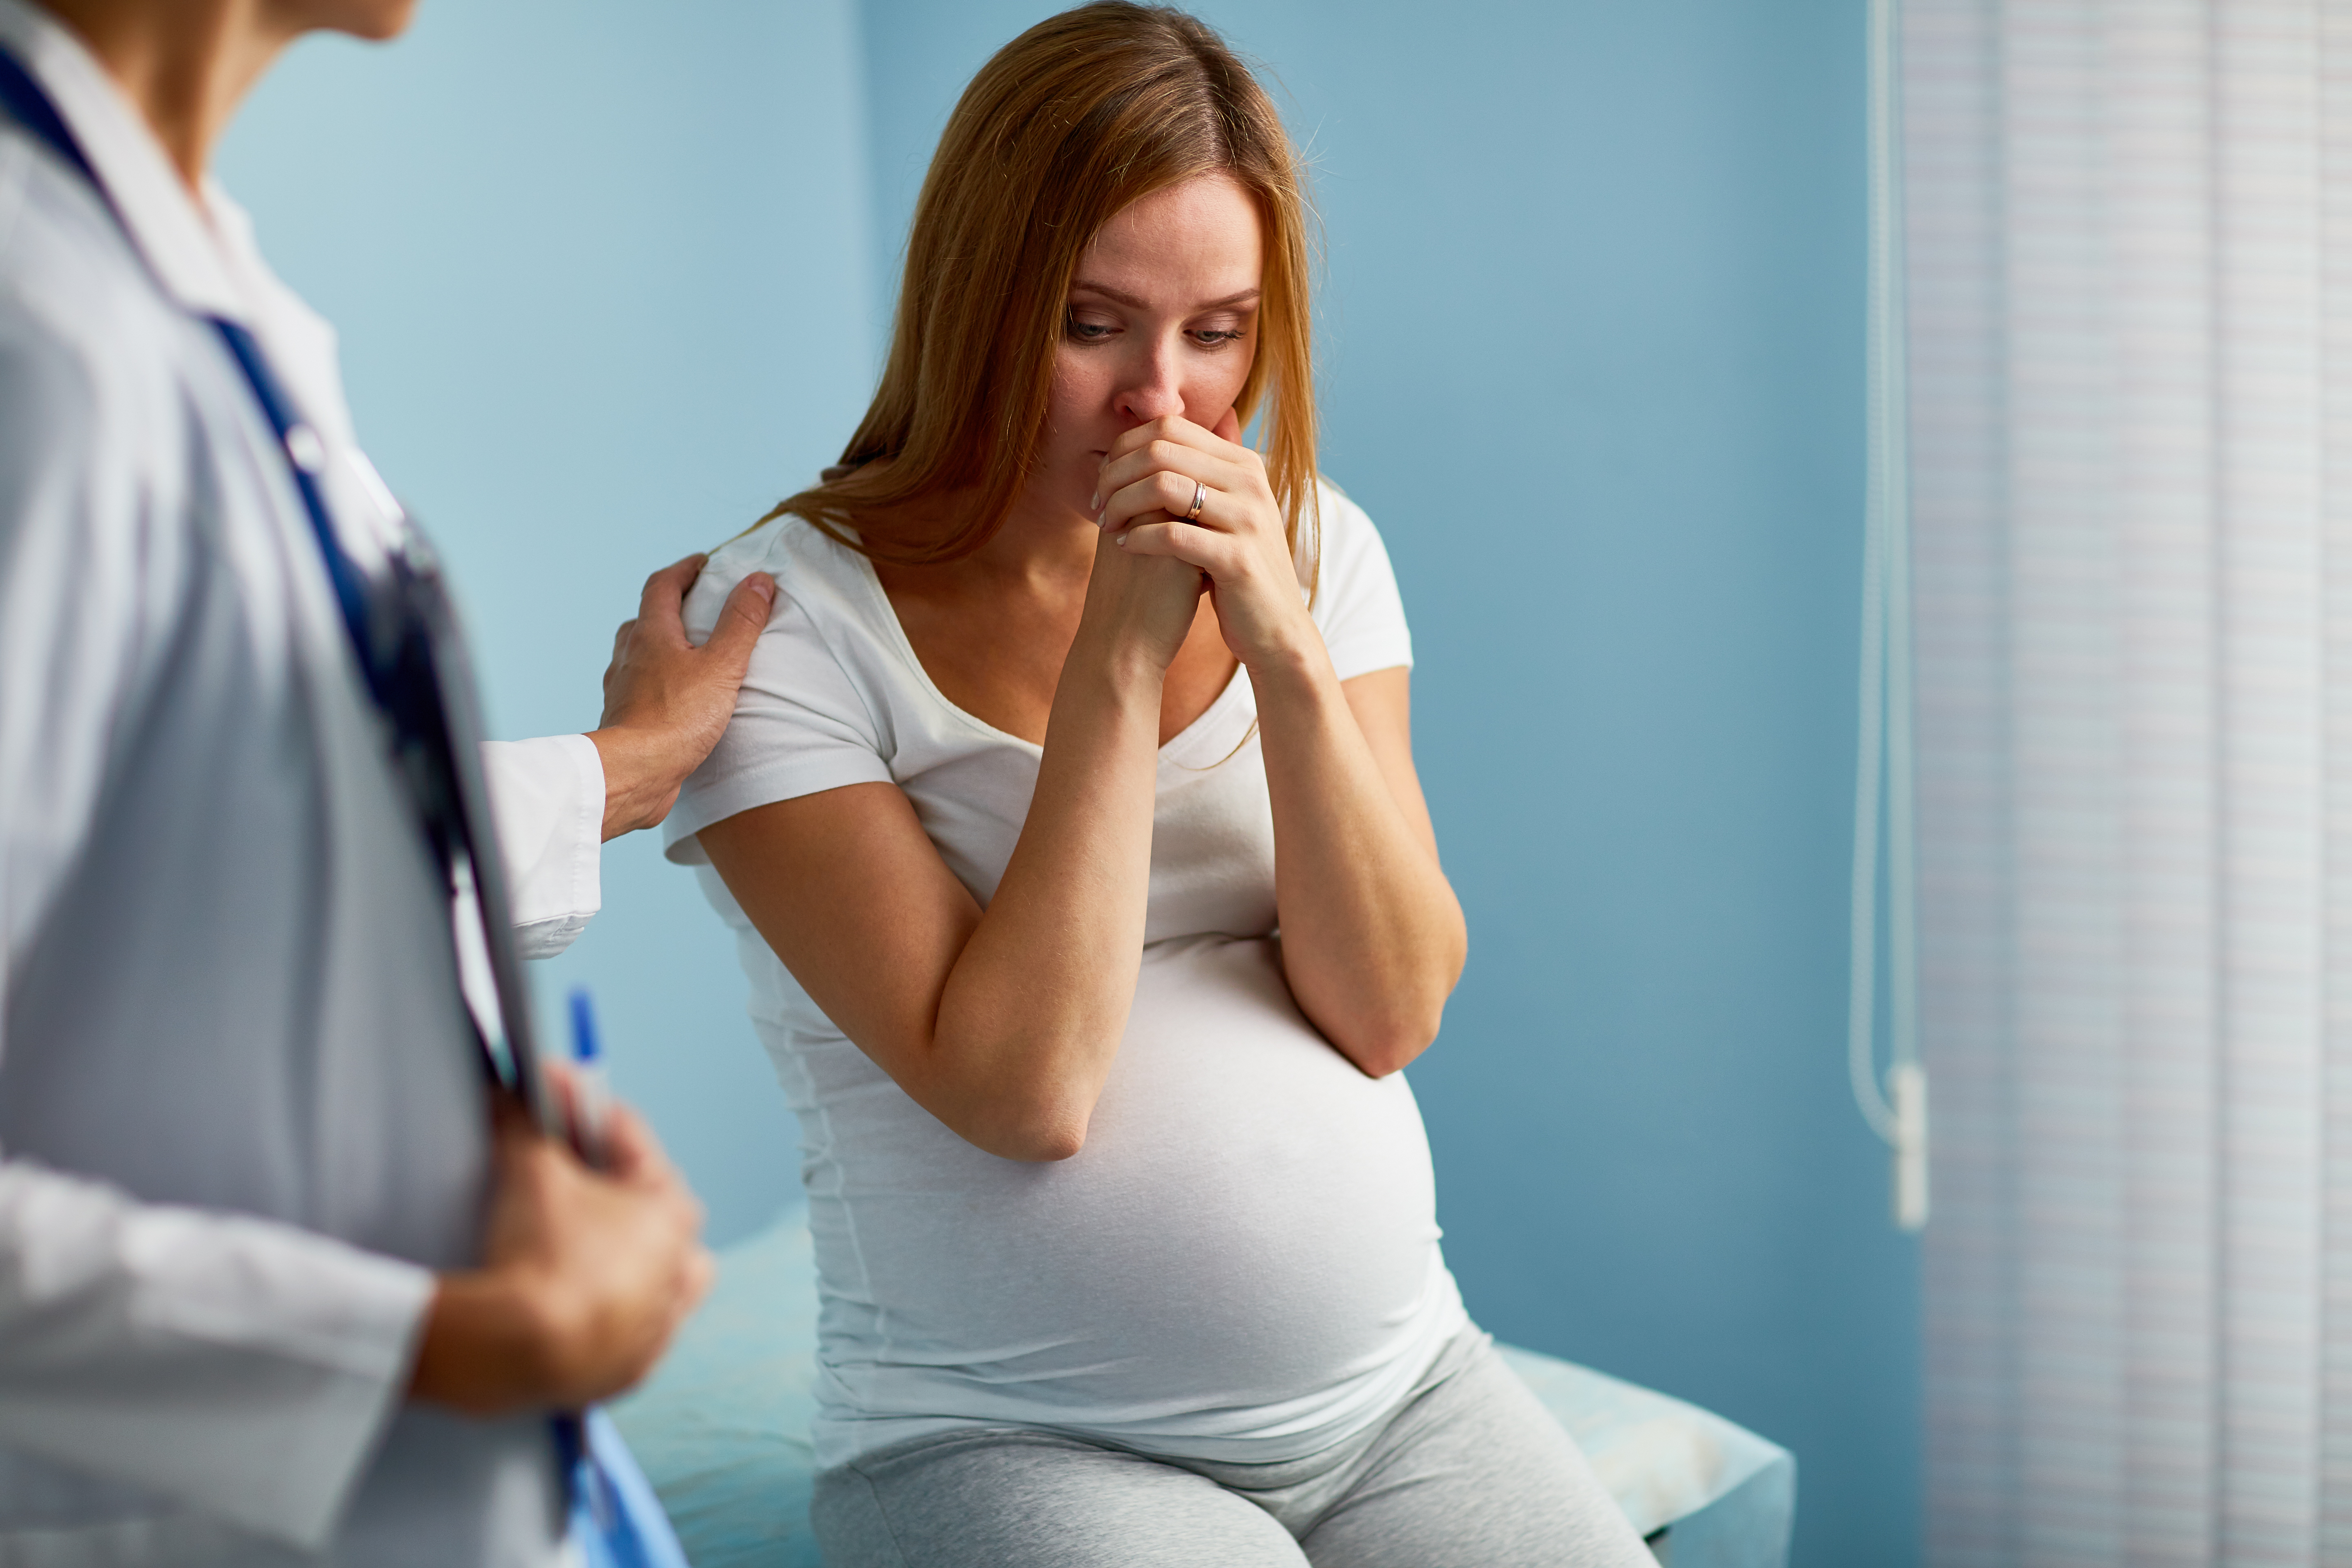 A pregnant woman at the doctor looking concerned | Source: Shutterstock